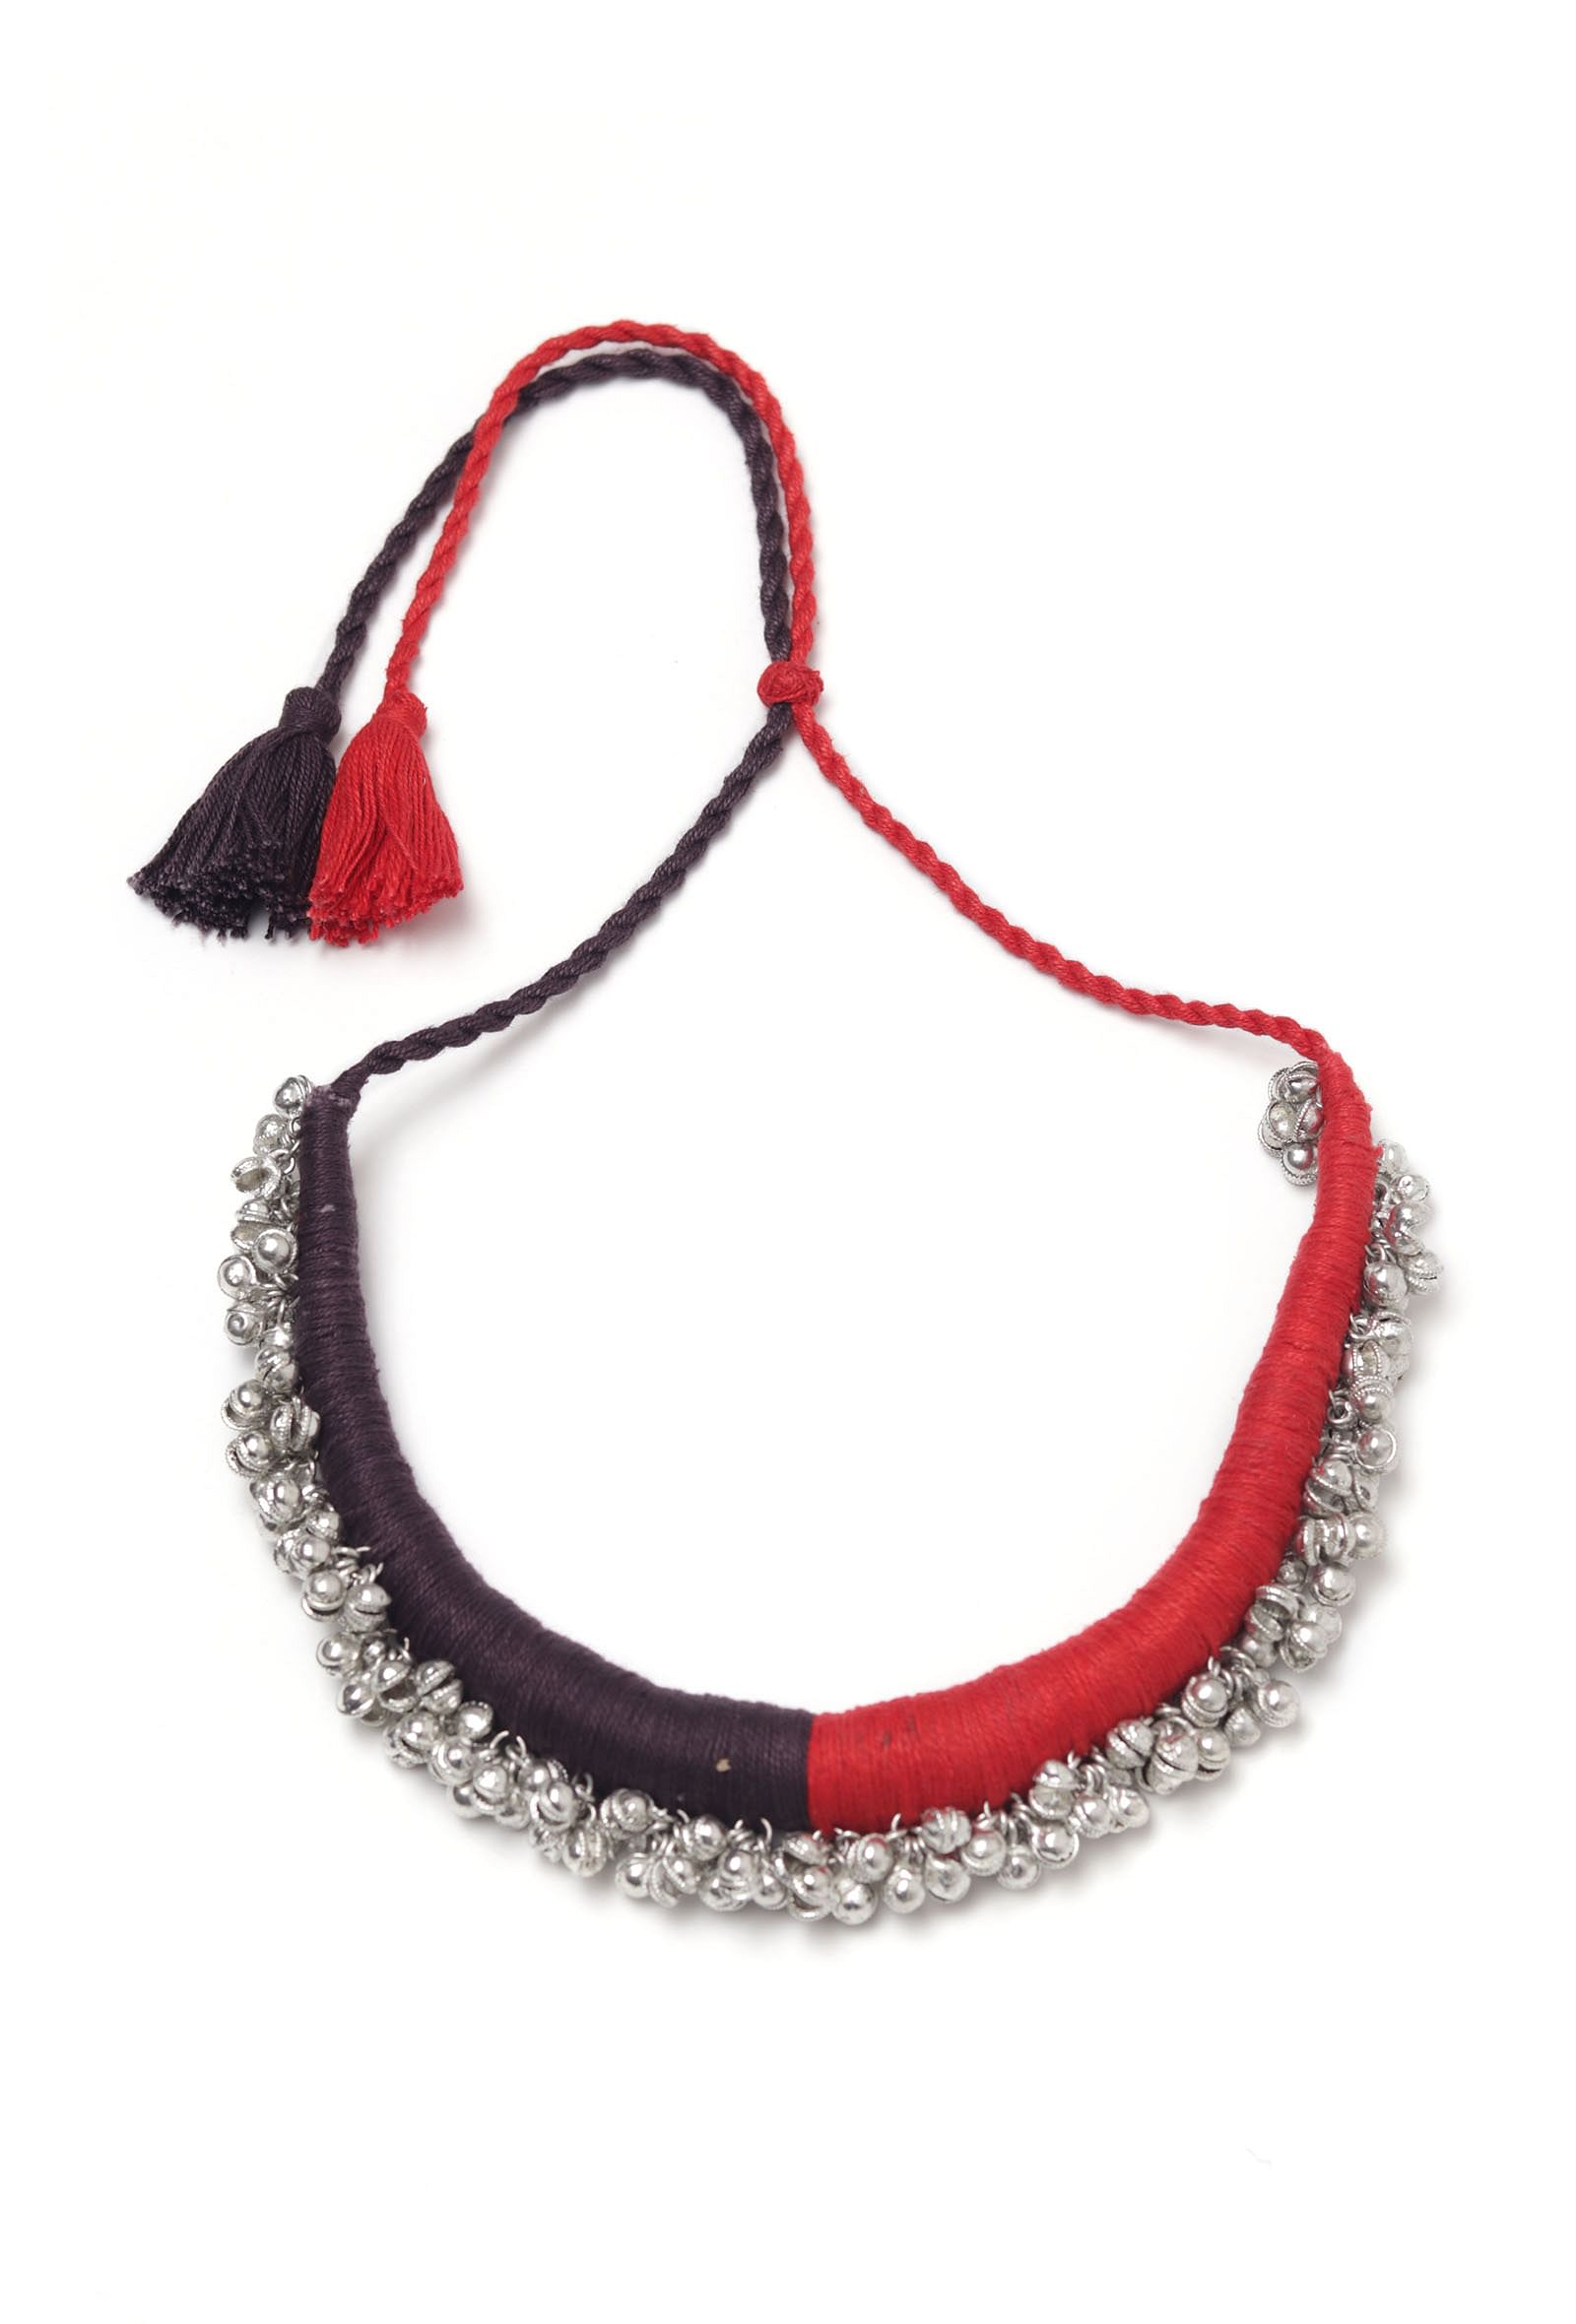 Fatima Duo Red and Black Silver Ghungroo Tribal Necklace